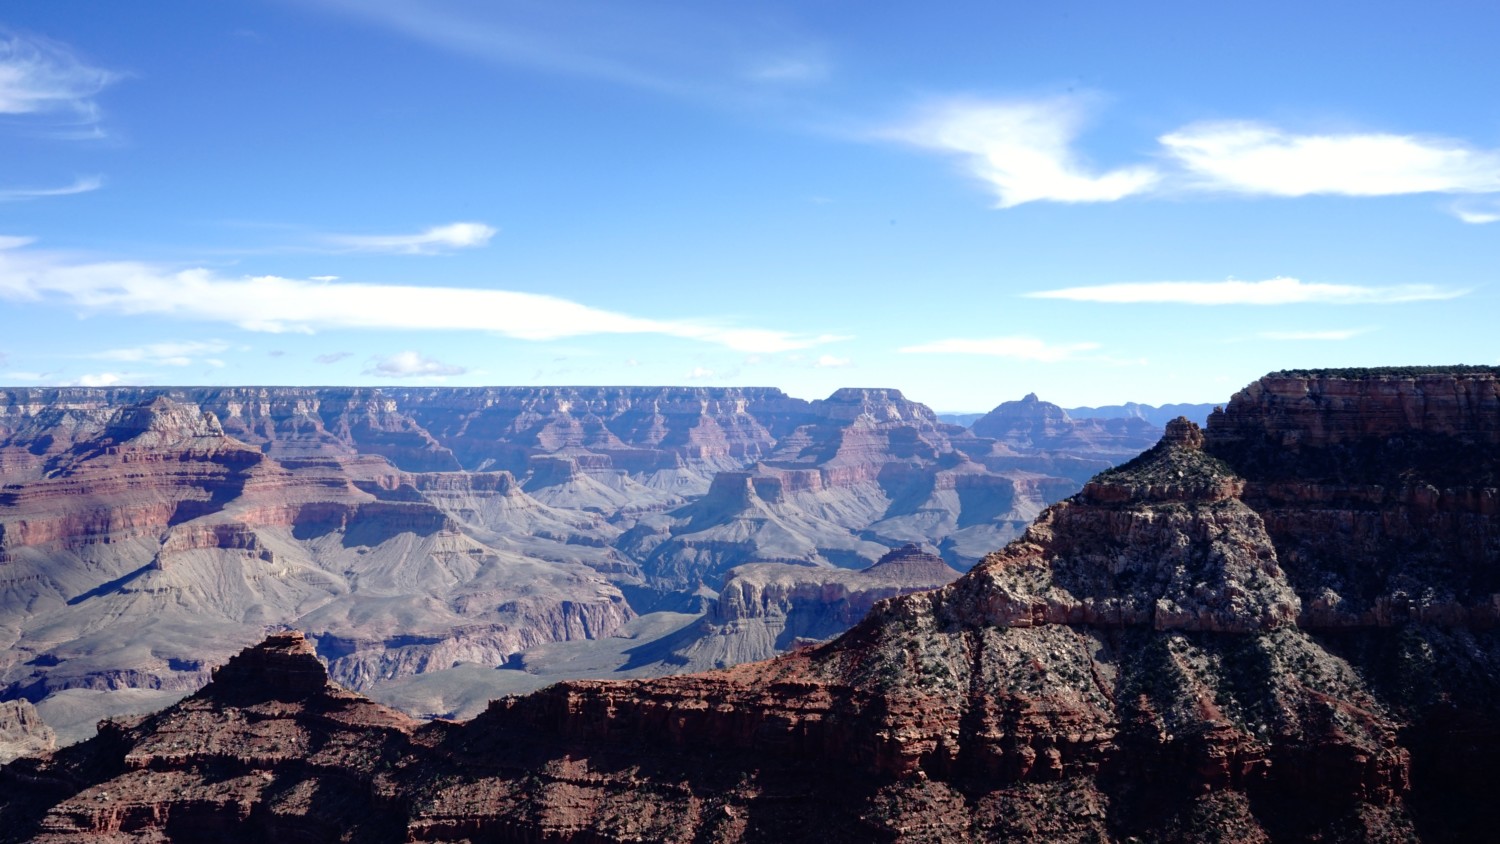 Pet Friendly National Park: The Grand Canyon | GoPetFriendly.com